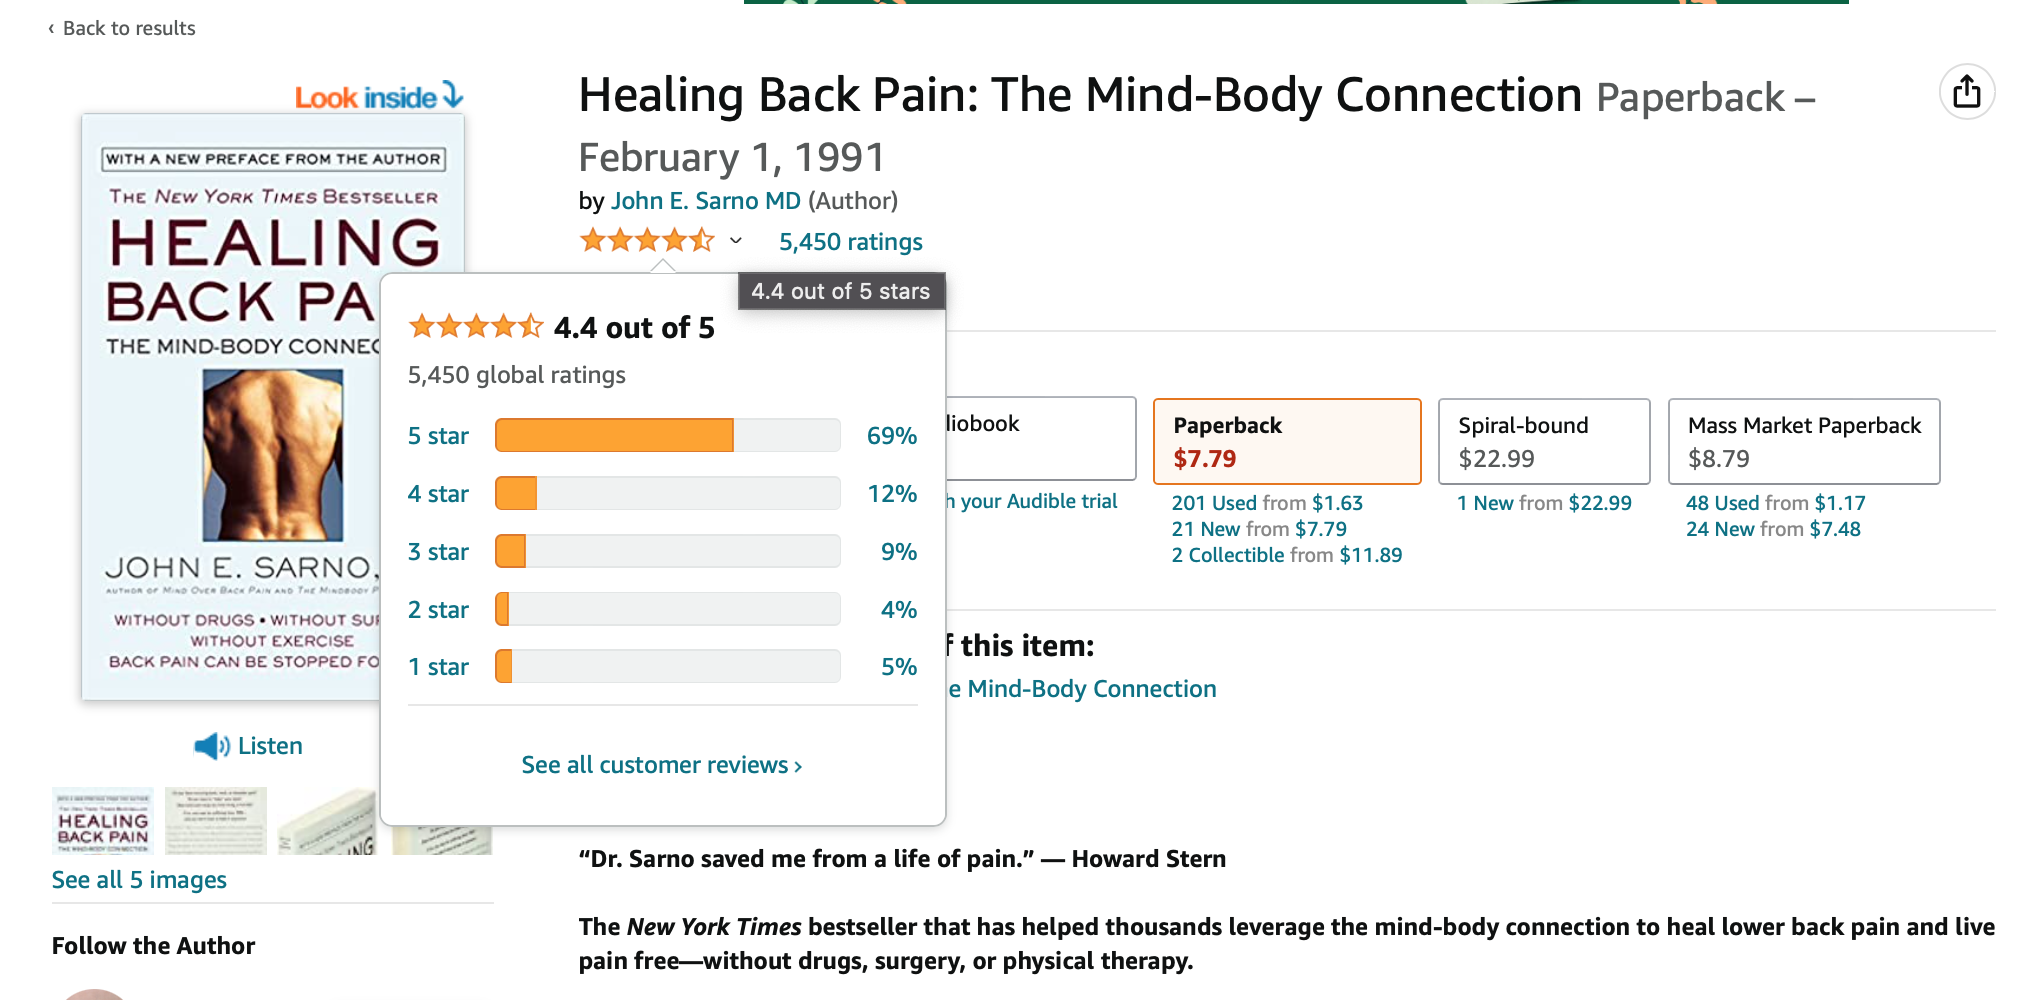 69 % of the 5450 reviews are 5 star and less than 20 percent are 1 or 2 star reviews. The average is 4.4 stars. 30 plus years after it's release the book is still #2 in back pain on Amazon